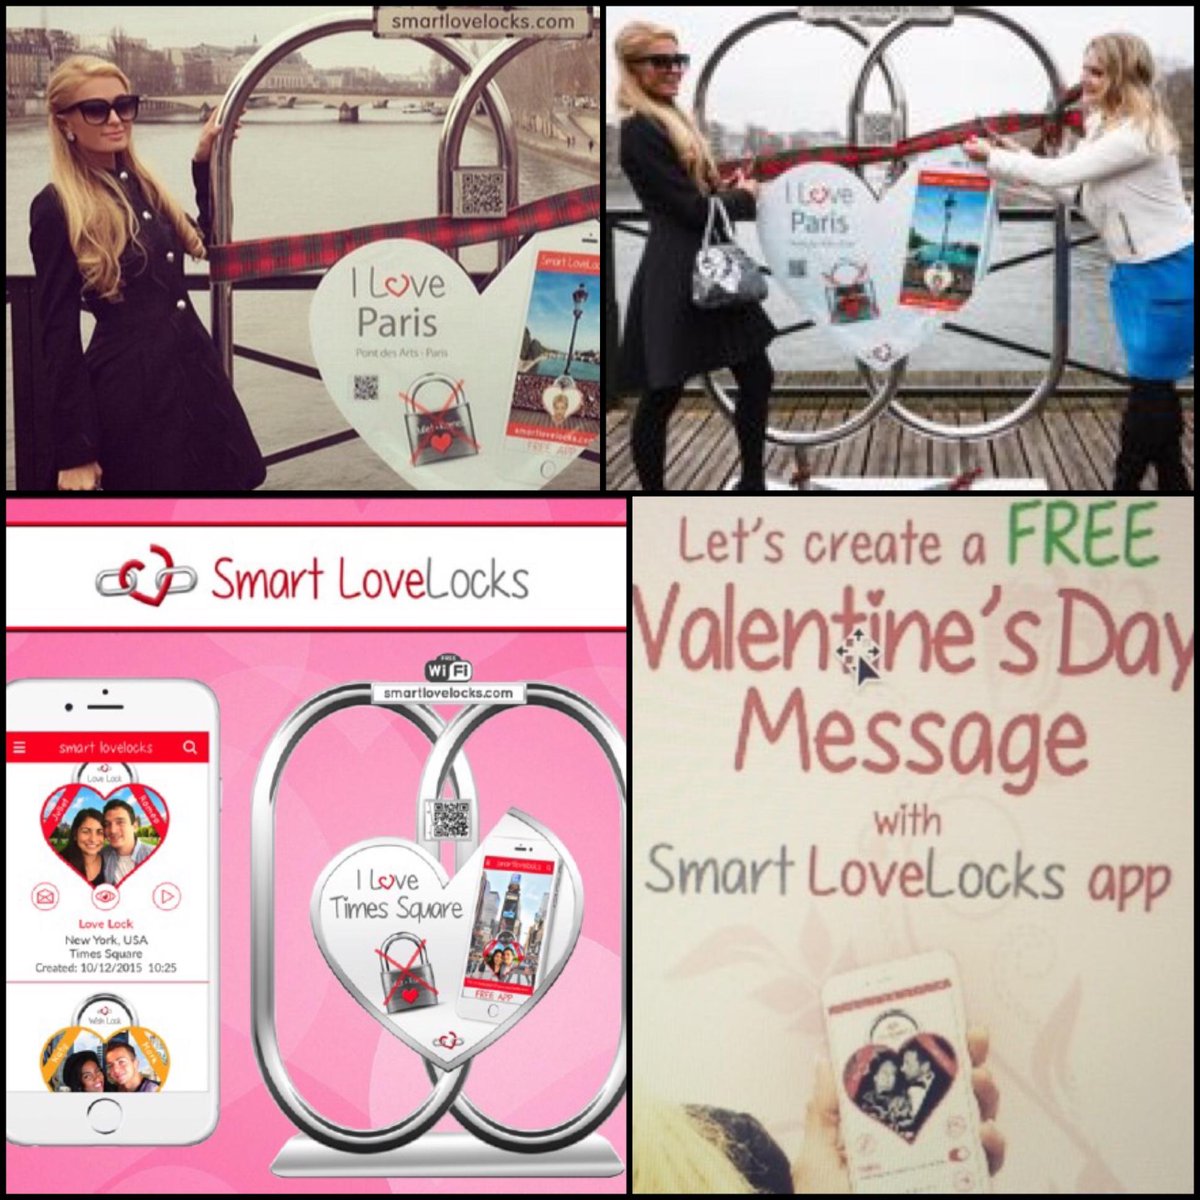 Tomorrow, send them a virtual #LoveLock for #ValentinesDay. It���s free! #SmartLoveLocks https://t.co/IGKy1430zN